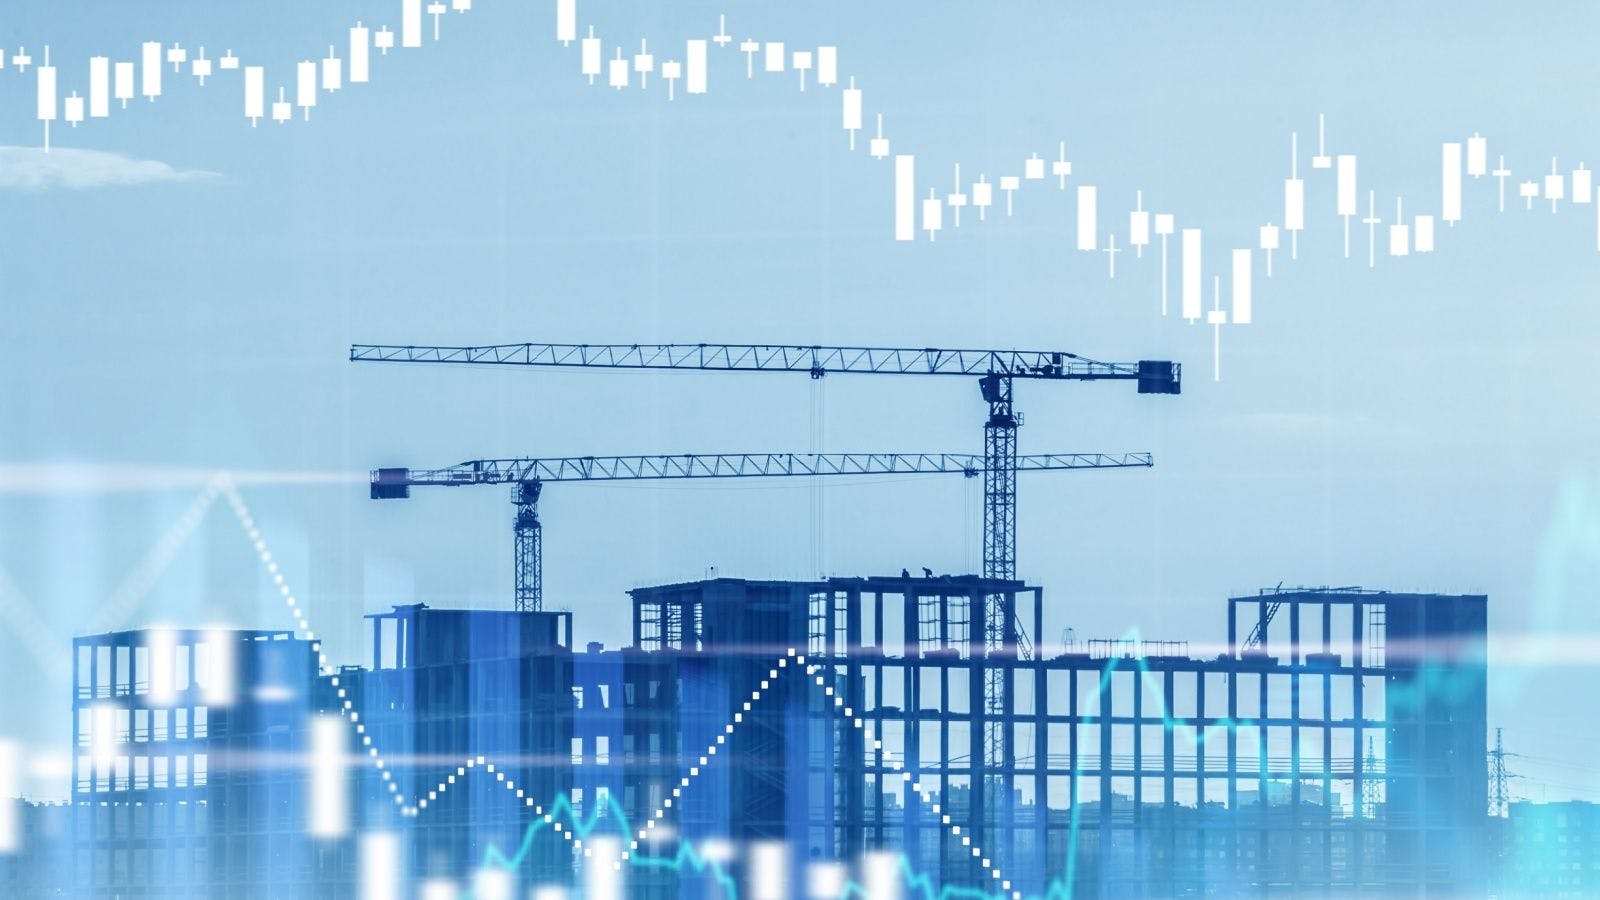 a digitally generated image of a construction site with a line graph overlaid